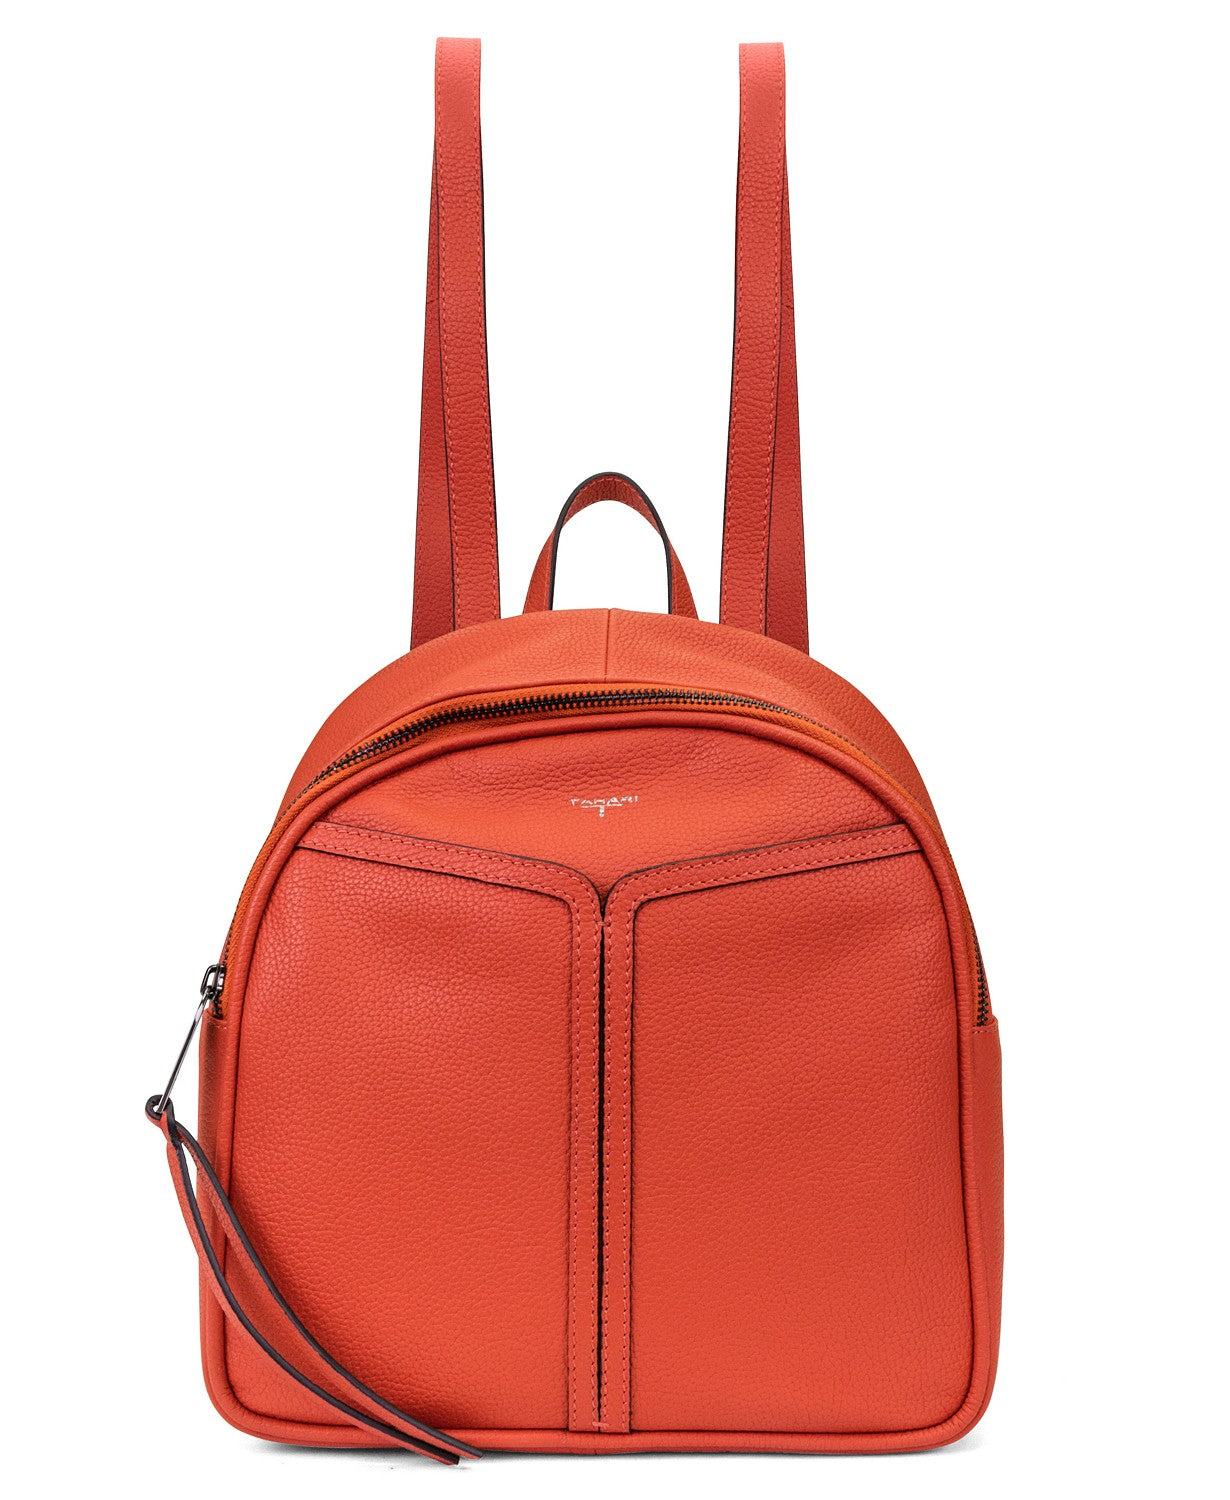 T Tahari Courtney Leather Backpack